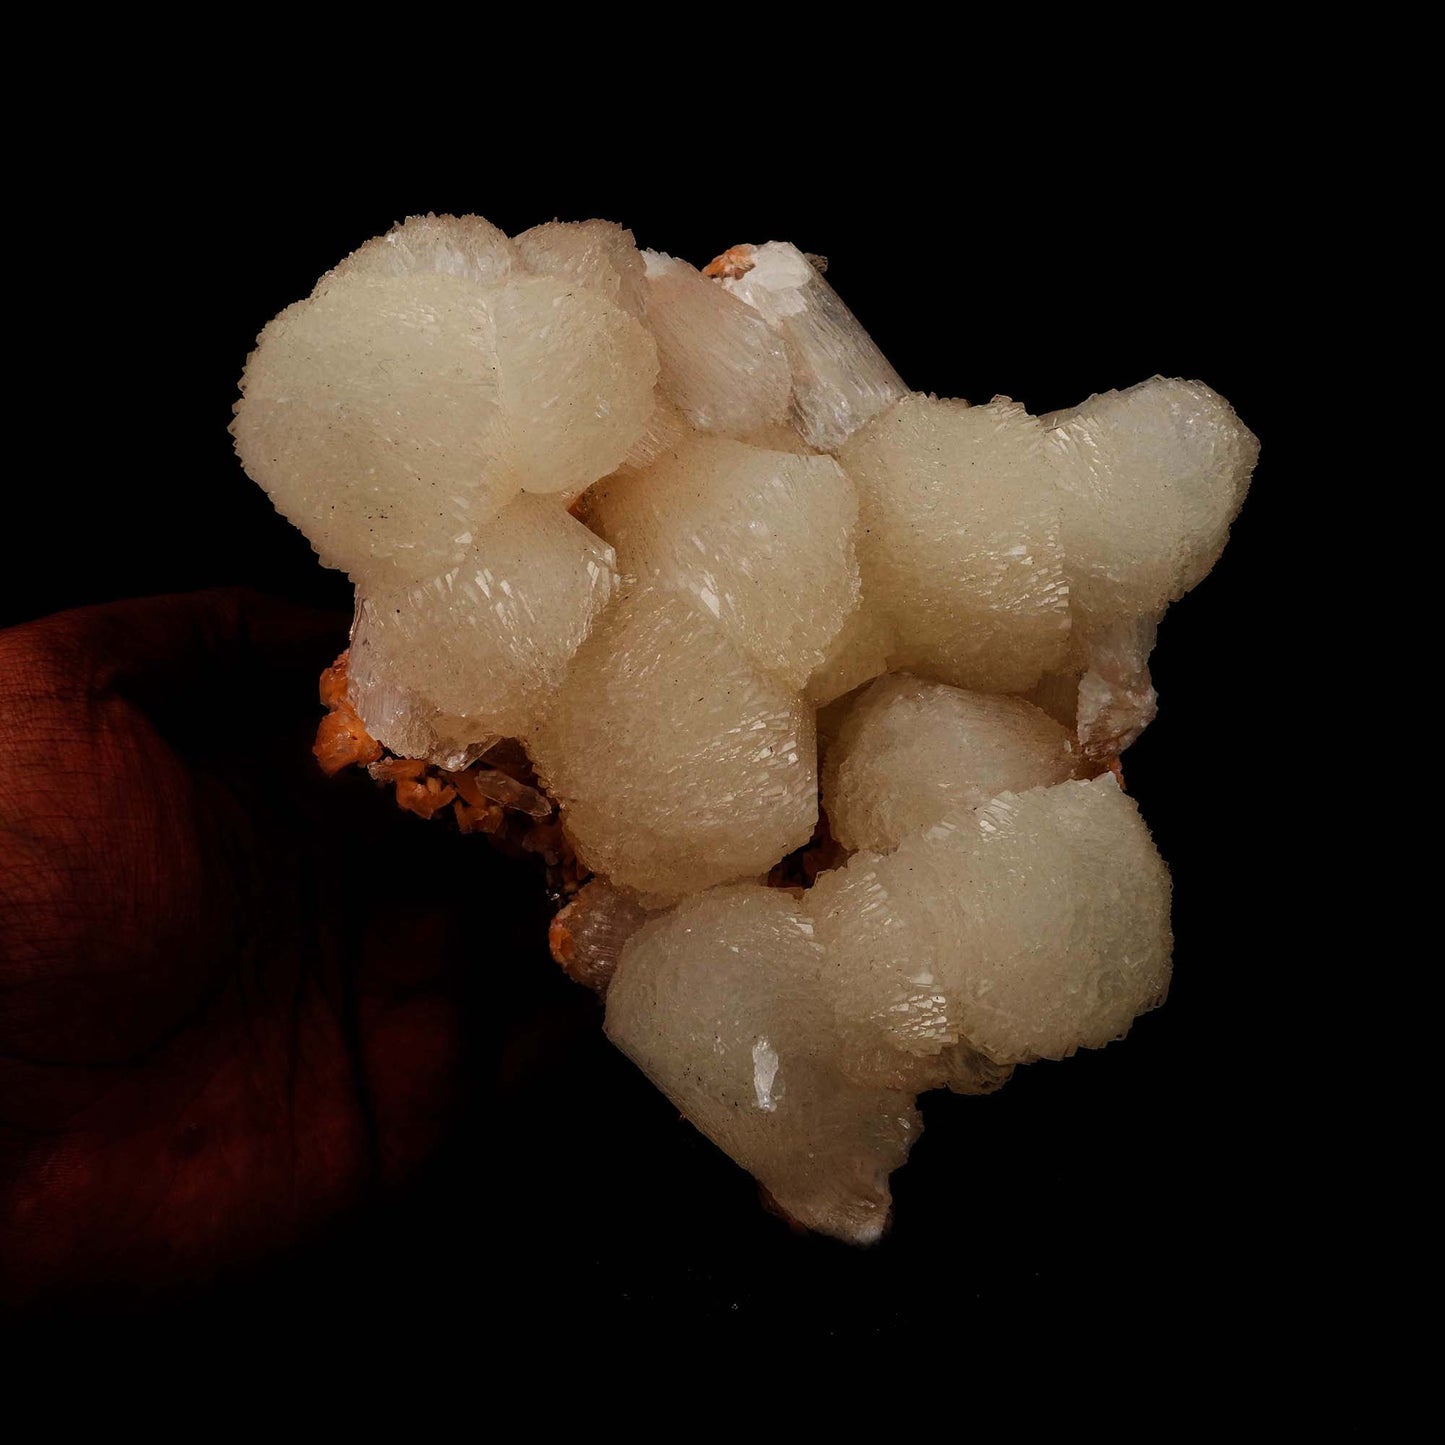 Stilbite Lusterous Cluster Natural Mineral Specimen # B 5185  https://www.superbminerals.us/products/stilbite-lusterous-cluster-natural-mineral-specimen-b-5185  Features: Featuring many excellent quality bladed groups of Stilbite in a soft white hue, resting over pearly stalactitic formations of peach colored Heulandite, this piece is a stunning example of the material. The sculpture is really flashy and three-dimensional, and I particularly like how the Stilbites 